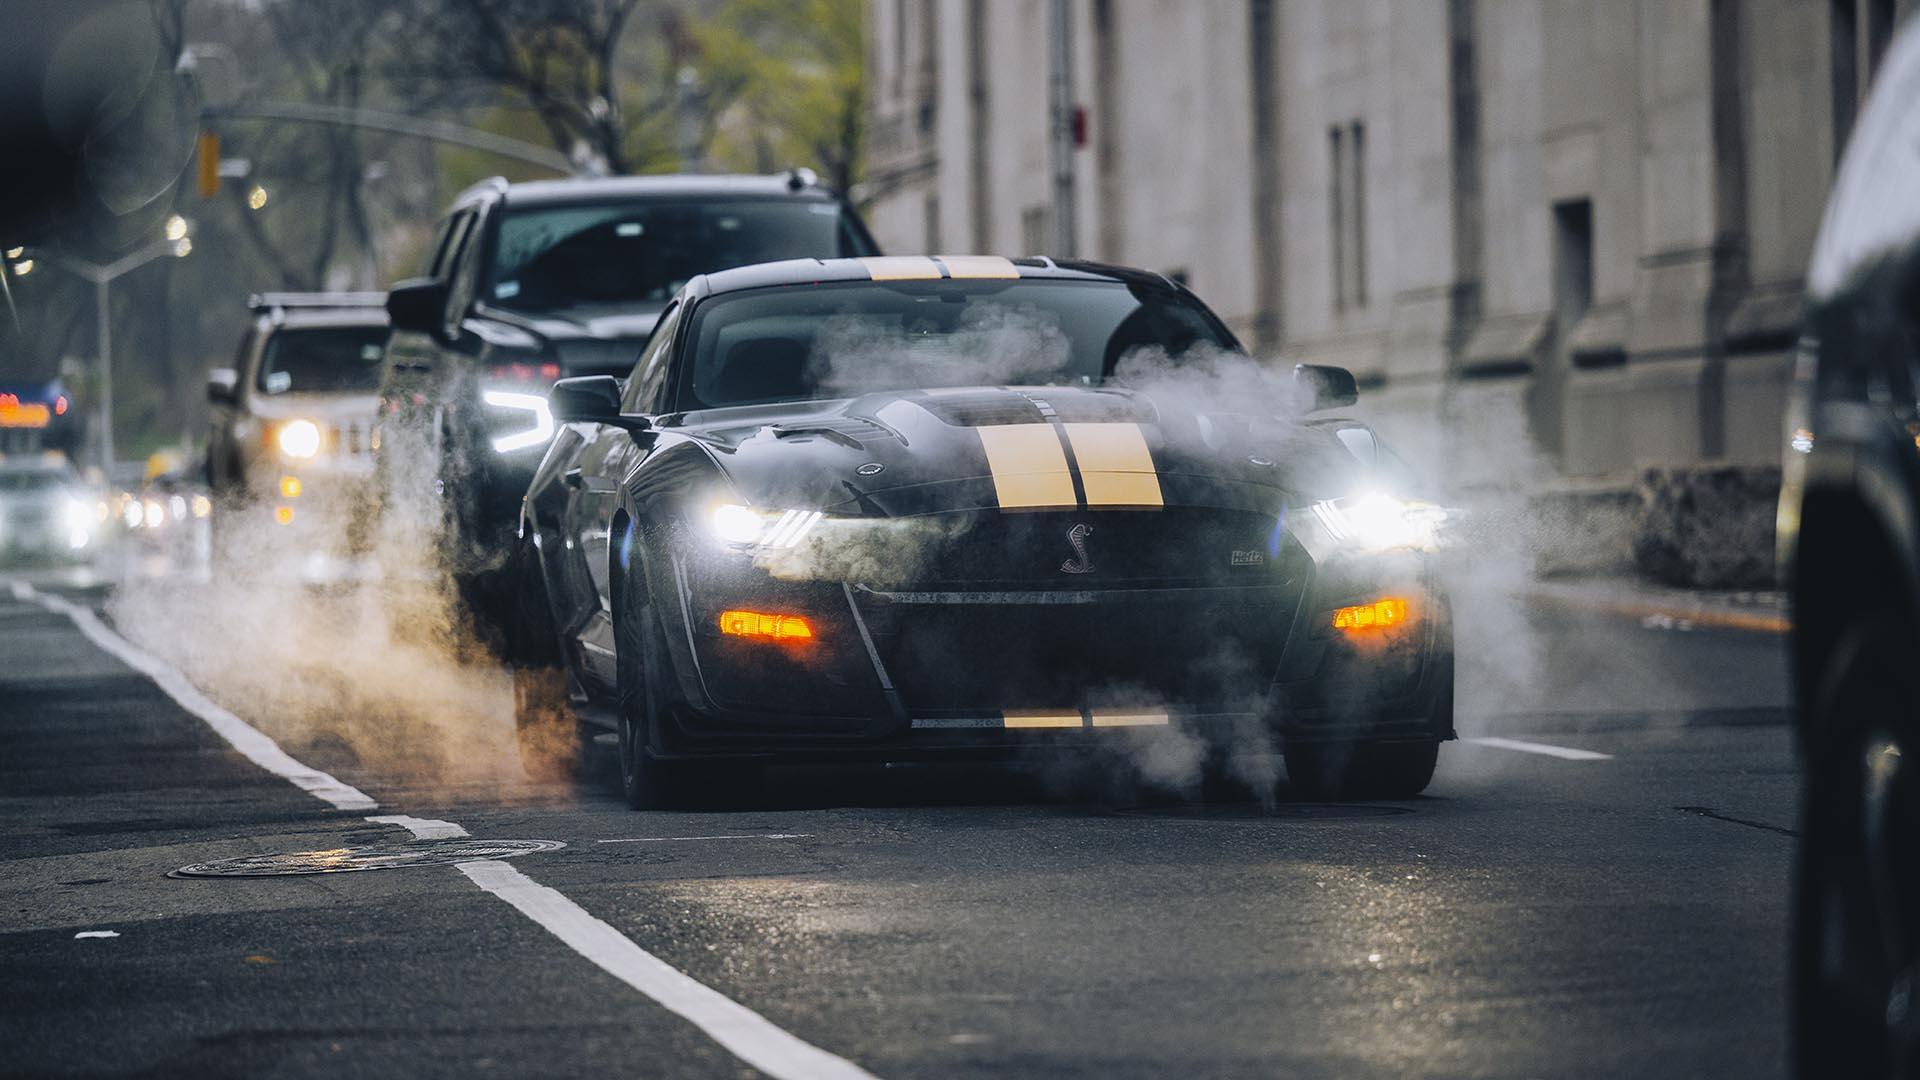 Top Gear Magazine 224 content: Ford Mustang Shelby GT500-H from Hertz in New York